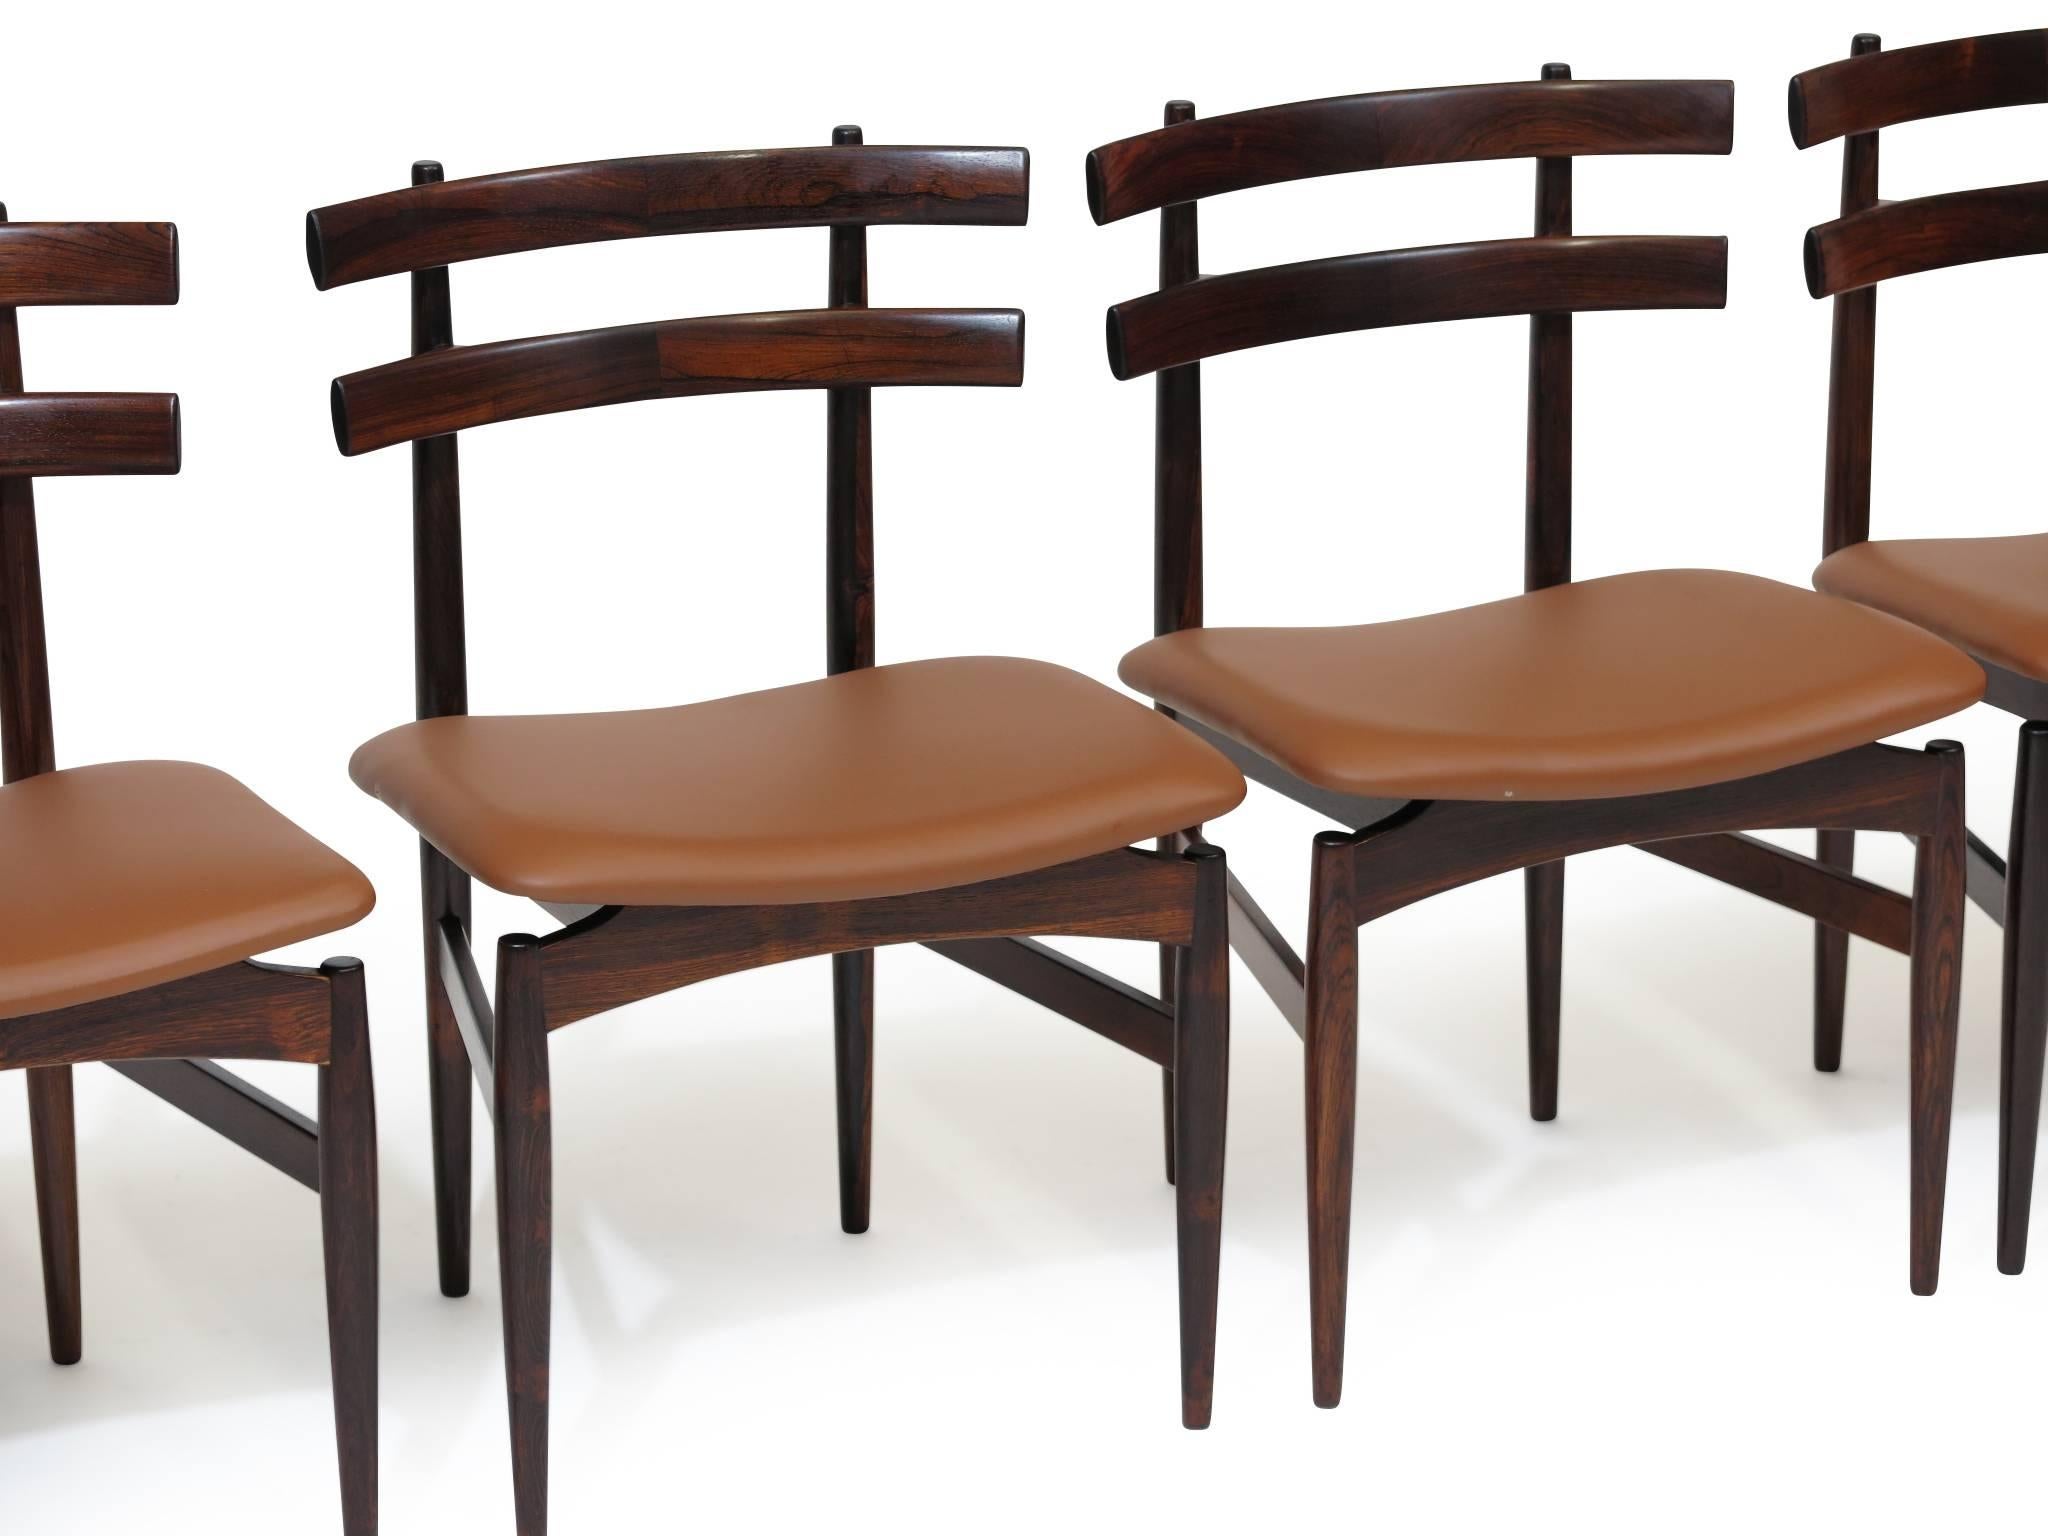 20th Century Poul Hundevad Sculpted Dining Chairs